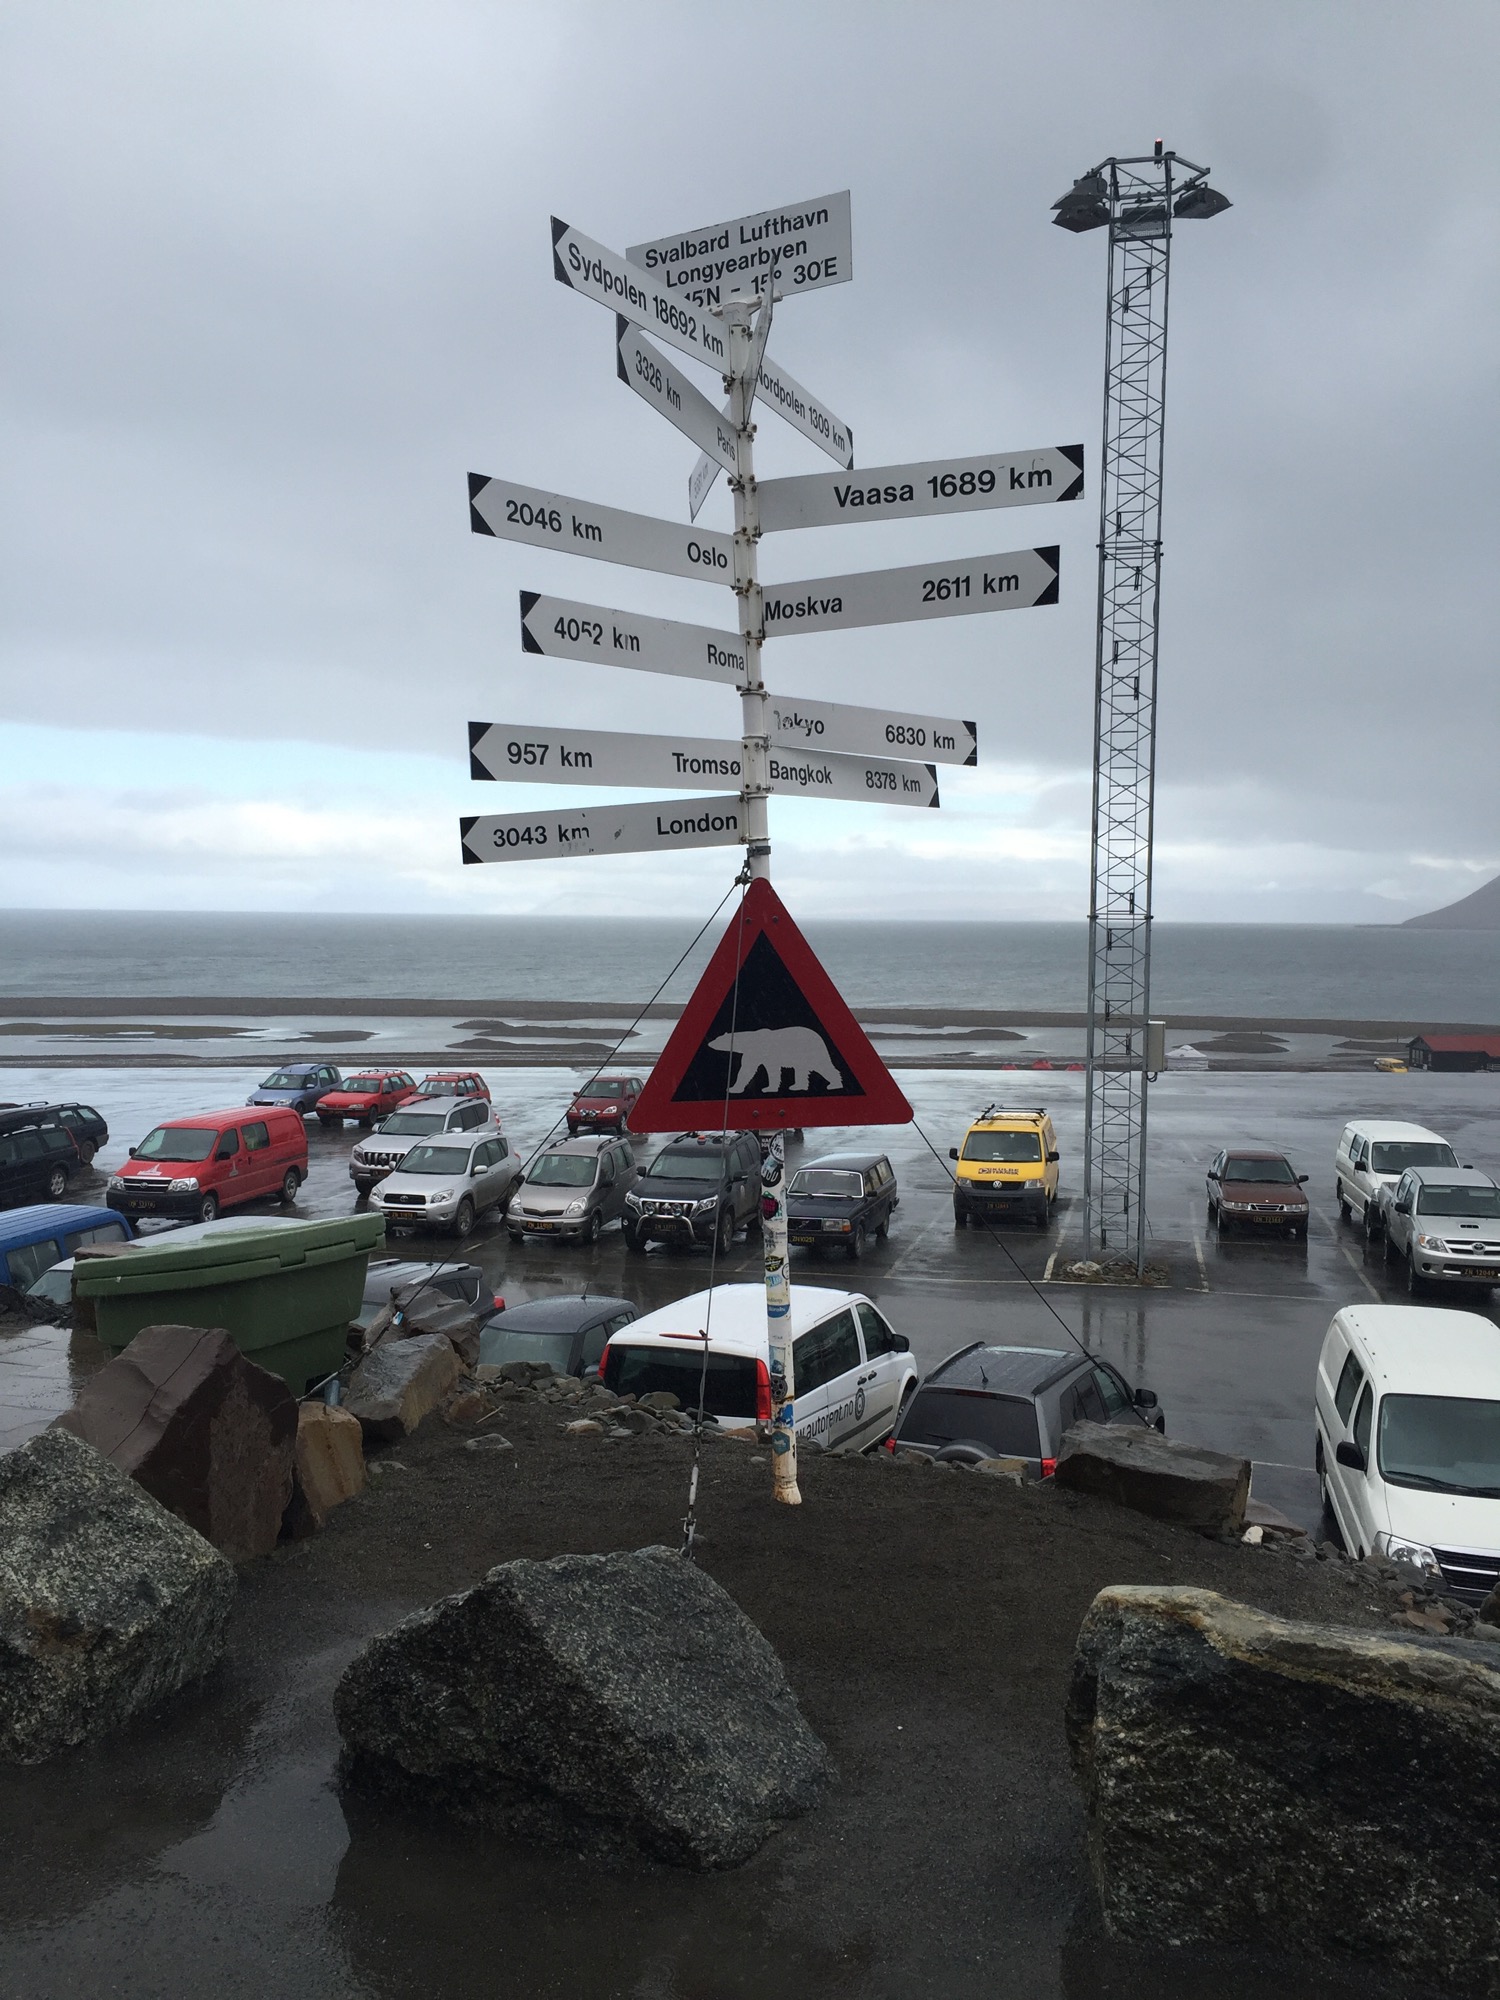 a signpost with a sign and a group of cars parked on a beach